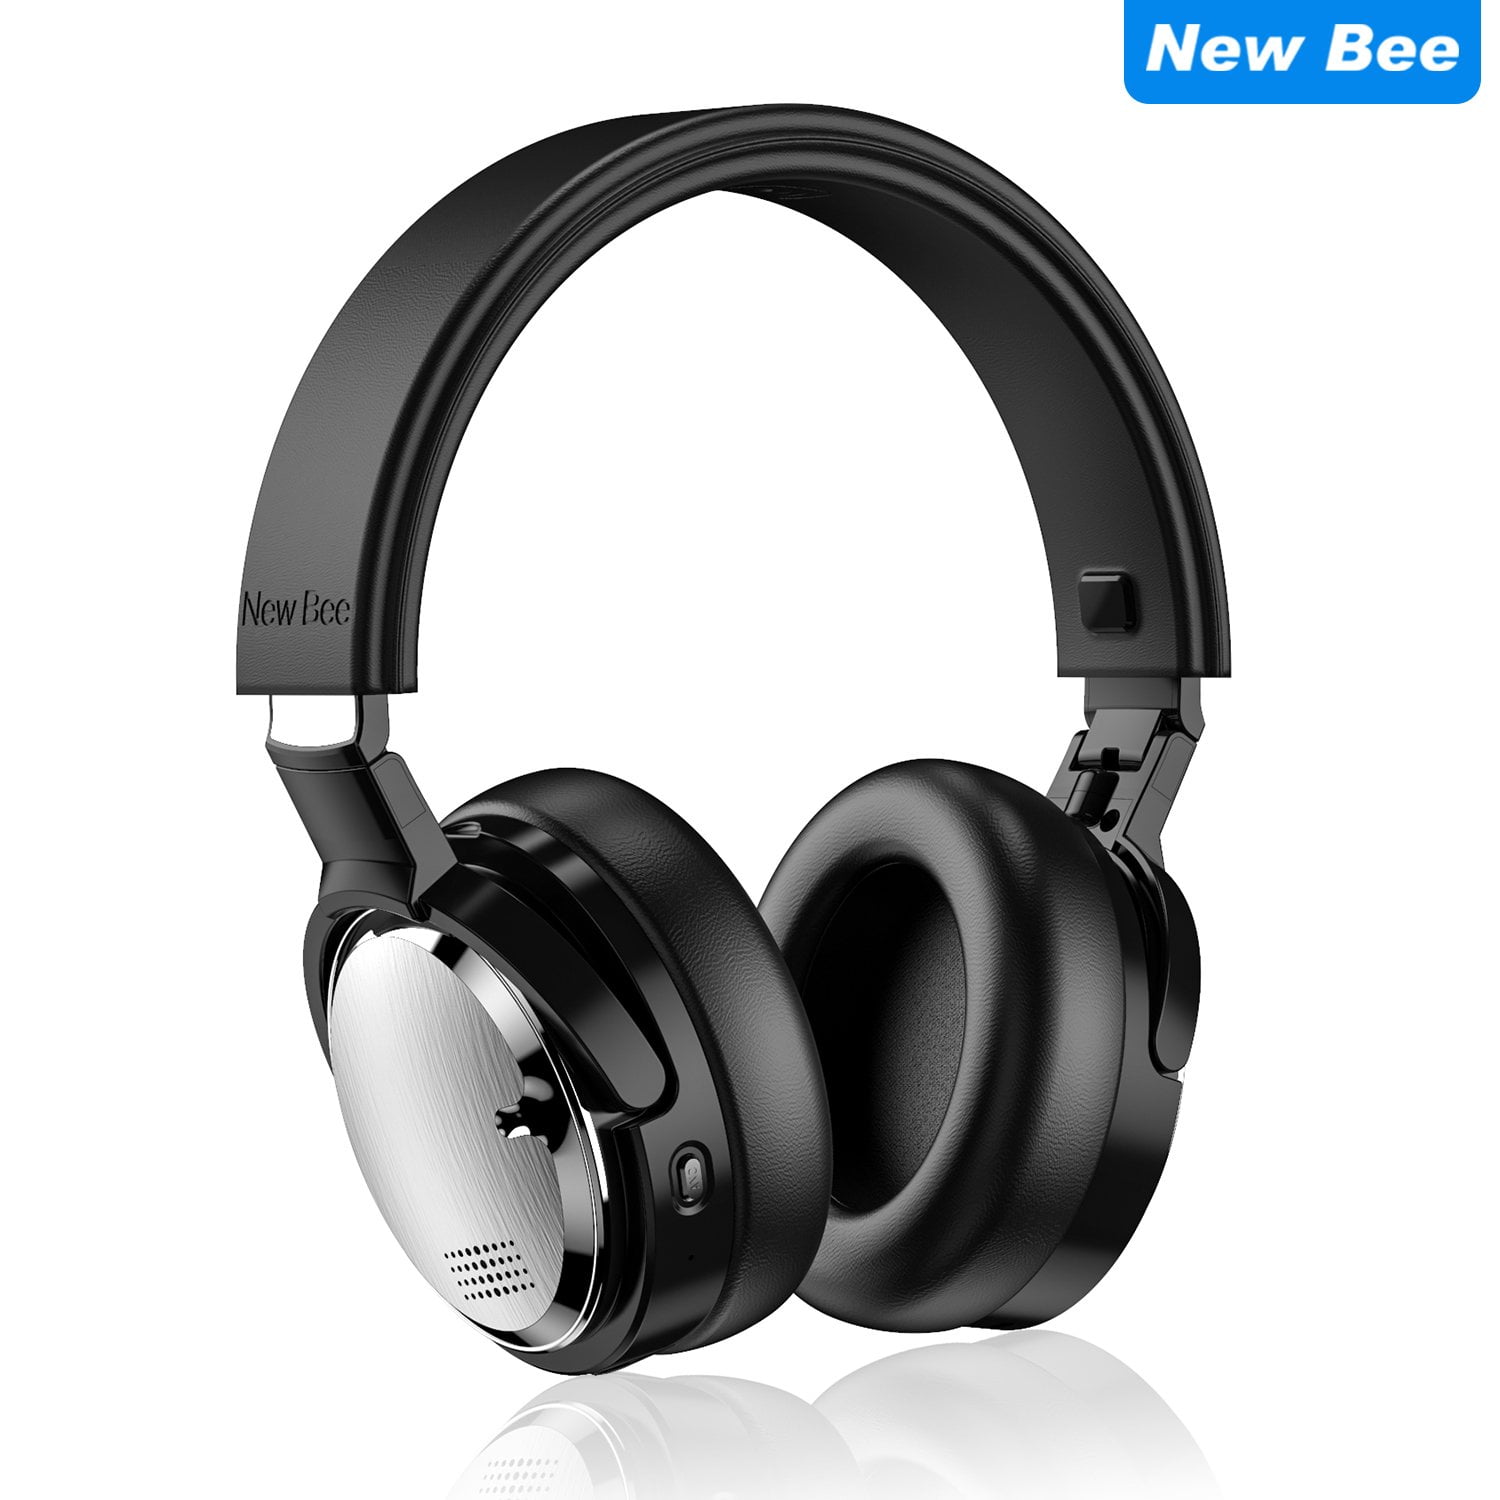 Taiko buik instinct Actuator Over Ear Wireless Headphones Bluetooth 5.0, Built-in Microphone, Active  Noise Cancelling, Headset for Computer, Laptop, Cell Phone - Walmart.com